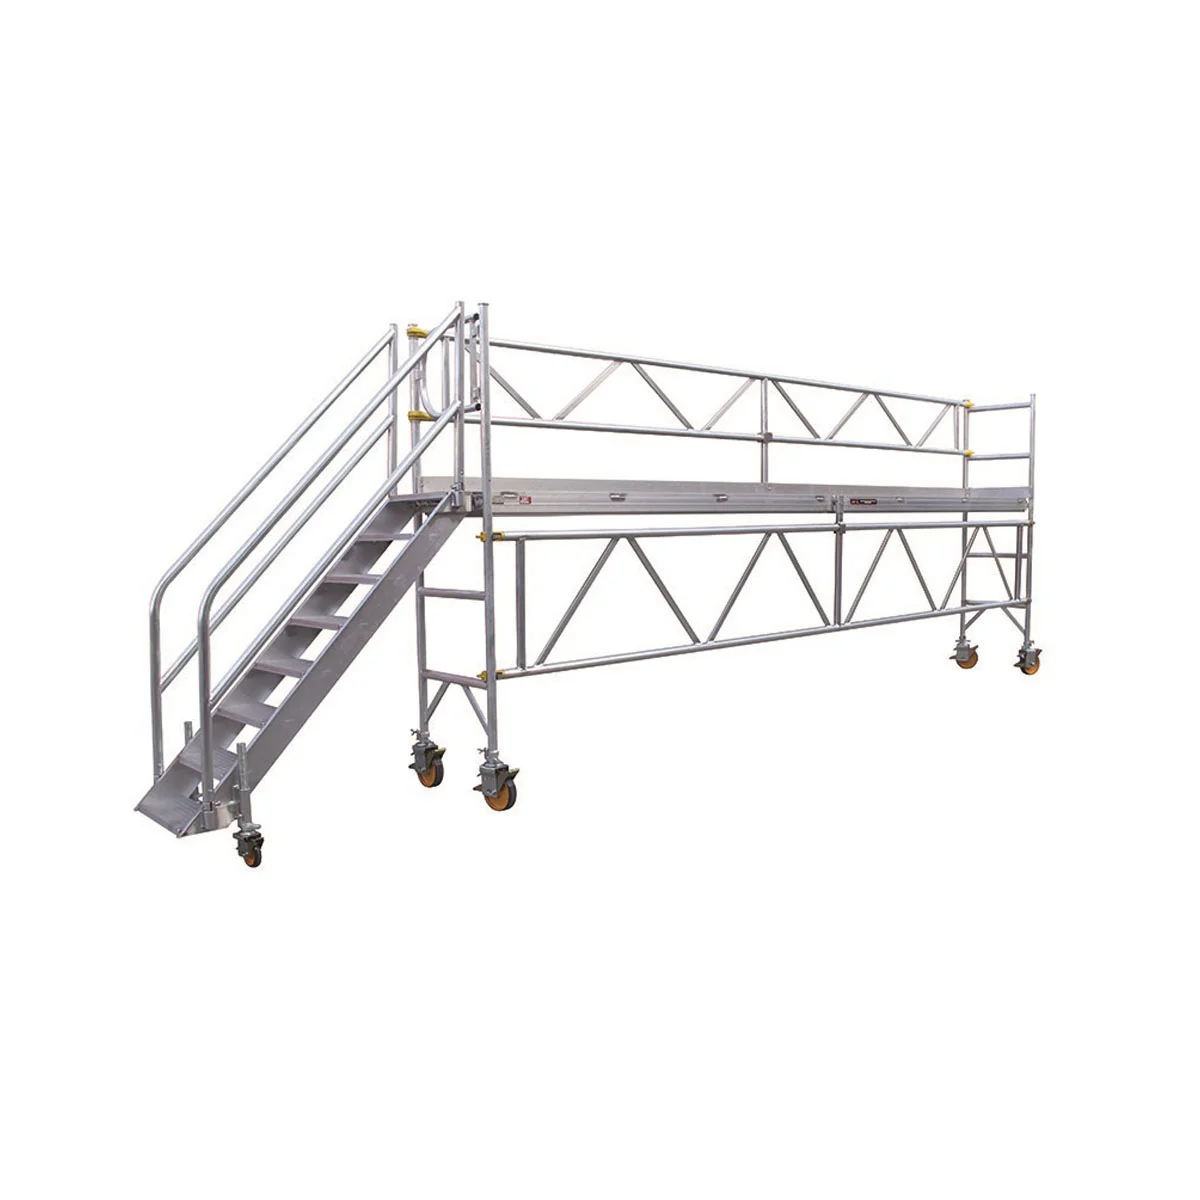 Buy Truck Access Platform in Stairs and Truck Access from Warthog available at Astrolift NZ